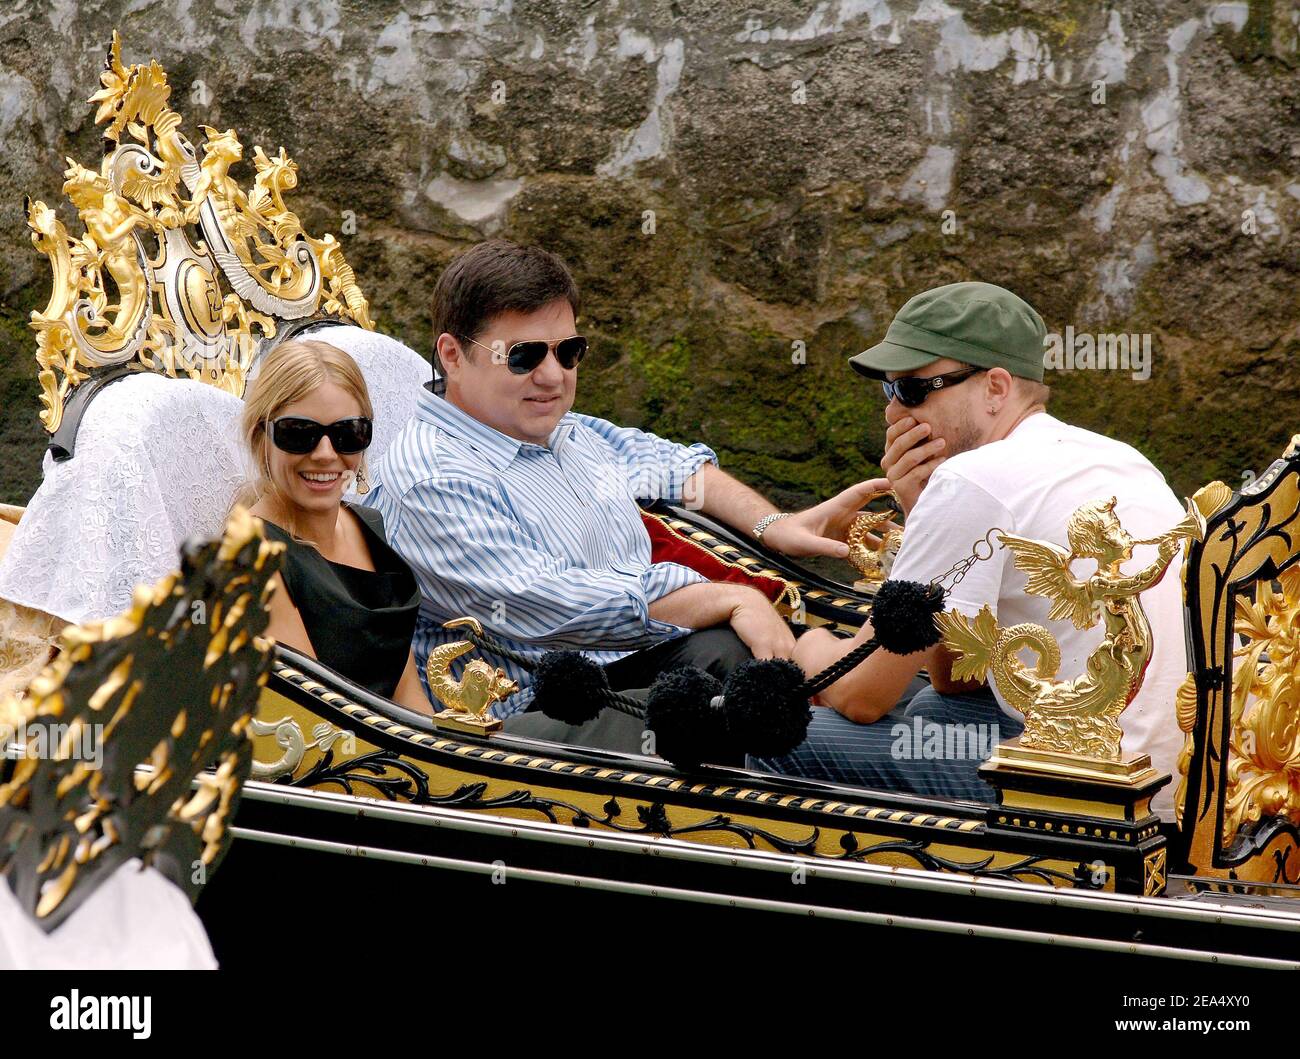 Cast members Sienna Miller, Oliver Platt and Heath Ledger arrive on a traditional gondola to attend the 'Casanova' photocall at the 62nd Mostra Venice Film Festival in Venice, Italy, on September 3, 2005. Photo by Lionel Hahn/ABACAPRESS.COM Stock Photo